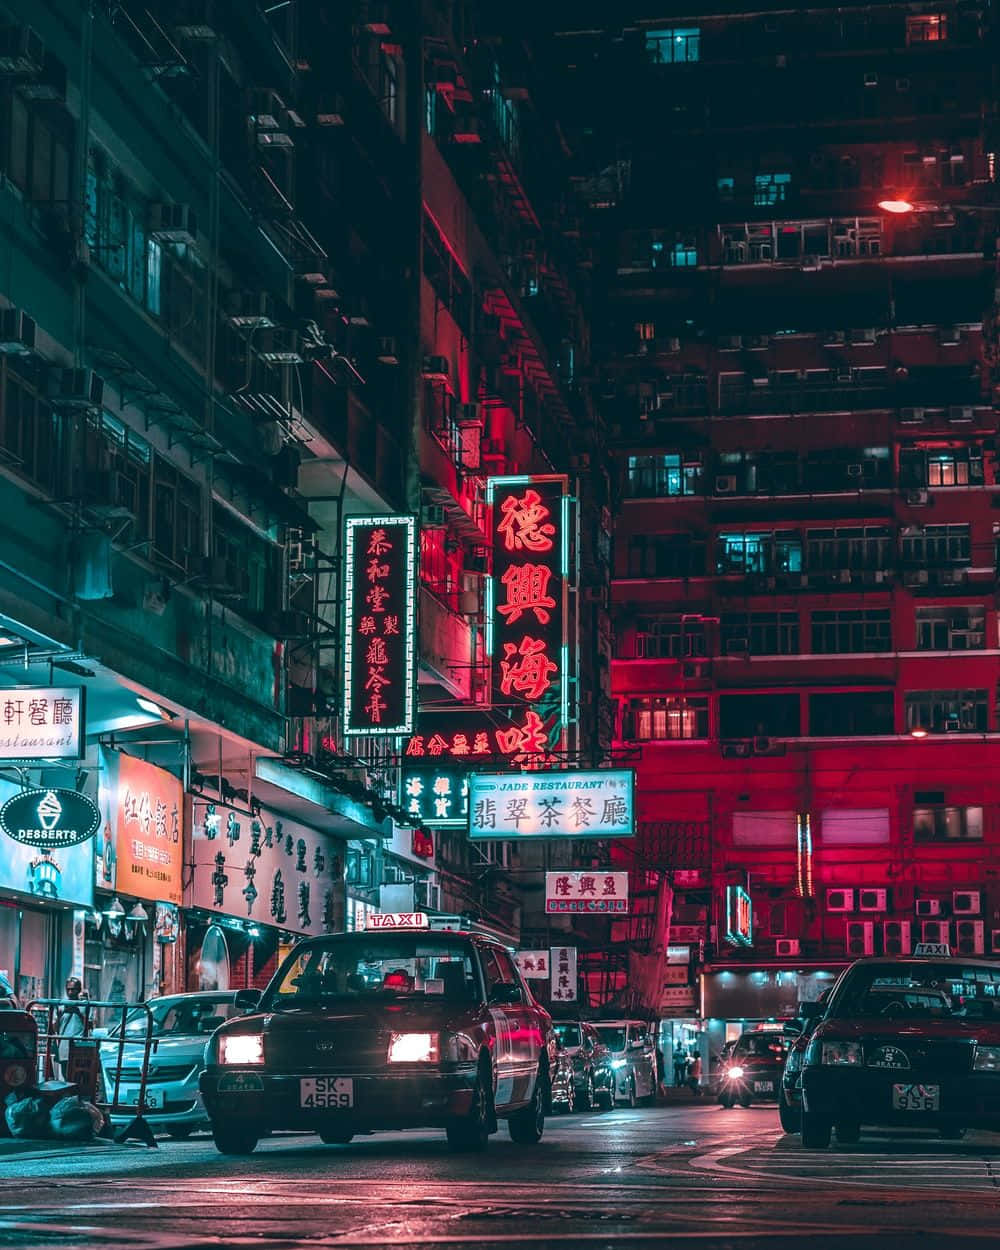 A City Street At Night With Neon Signs